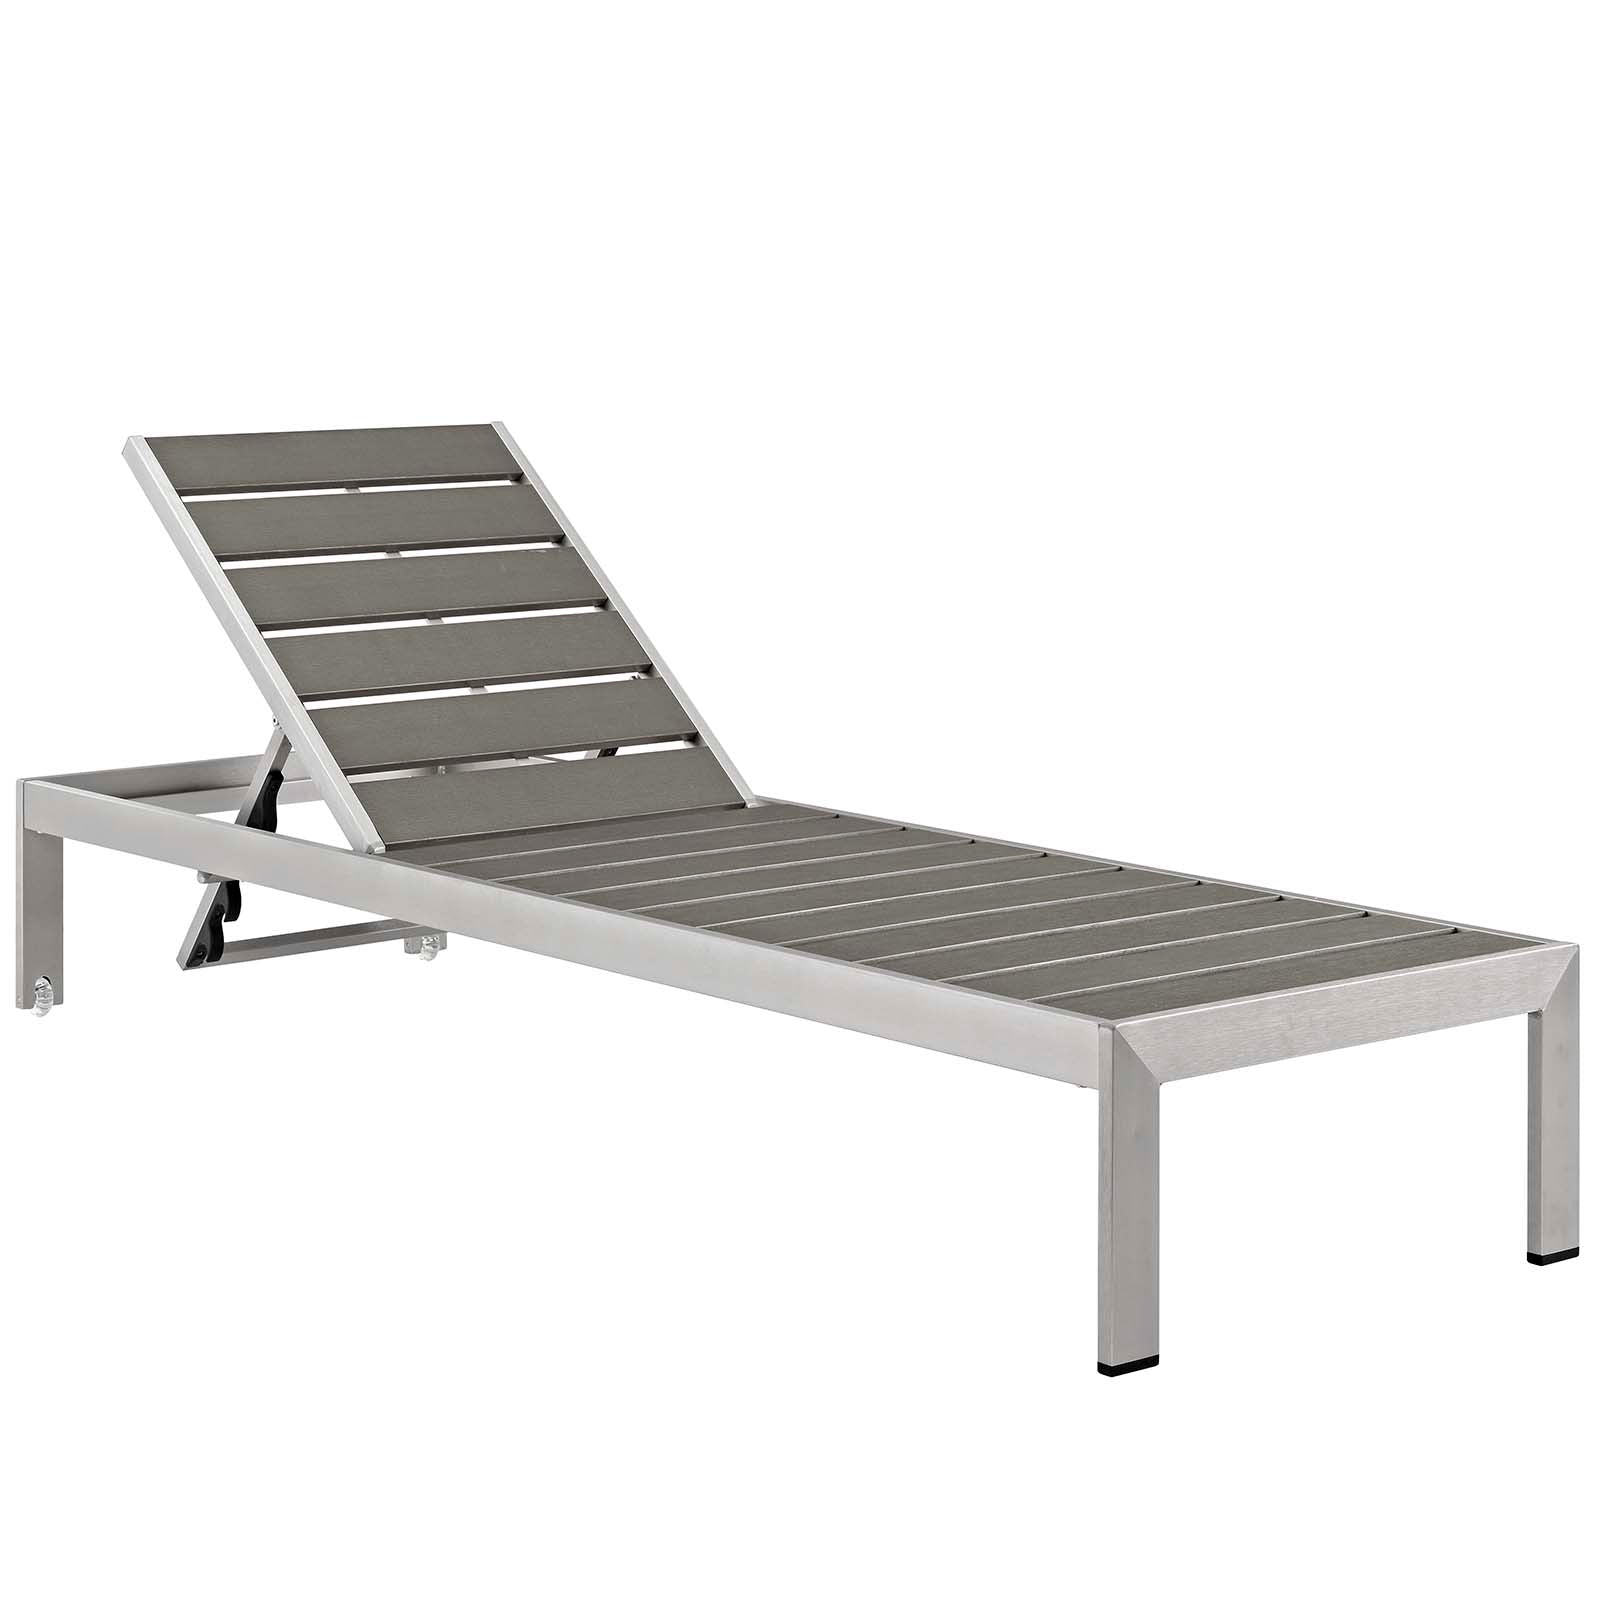 Modway Outdoor Loungers - Shore Outdoor Patio Aluminum Chaise Silver Orange